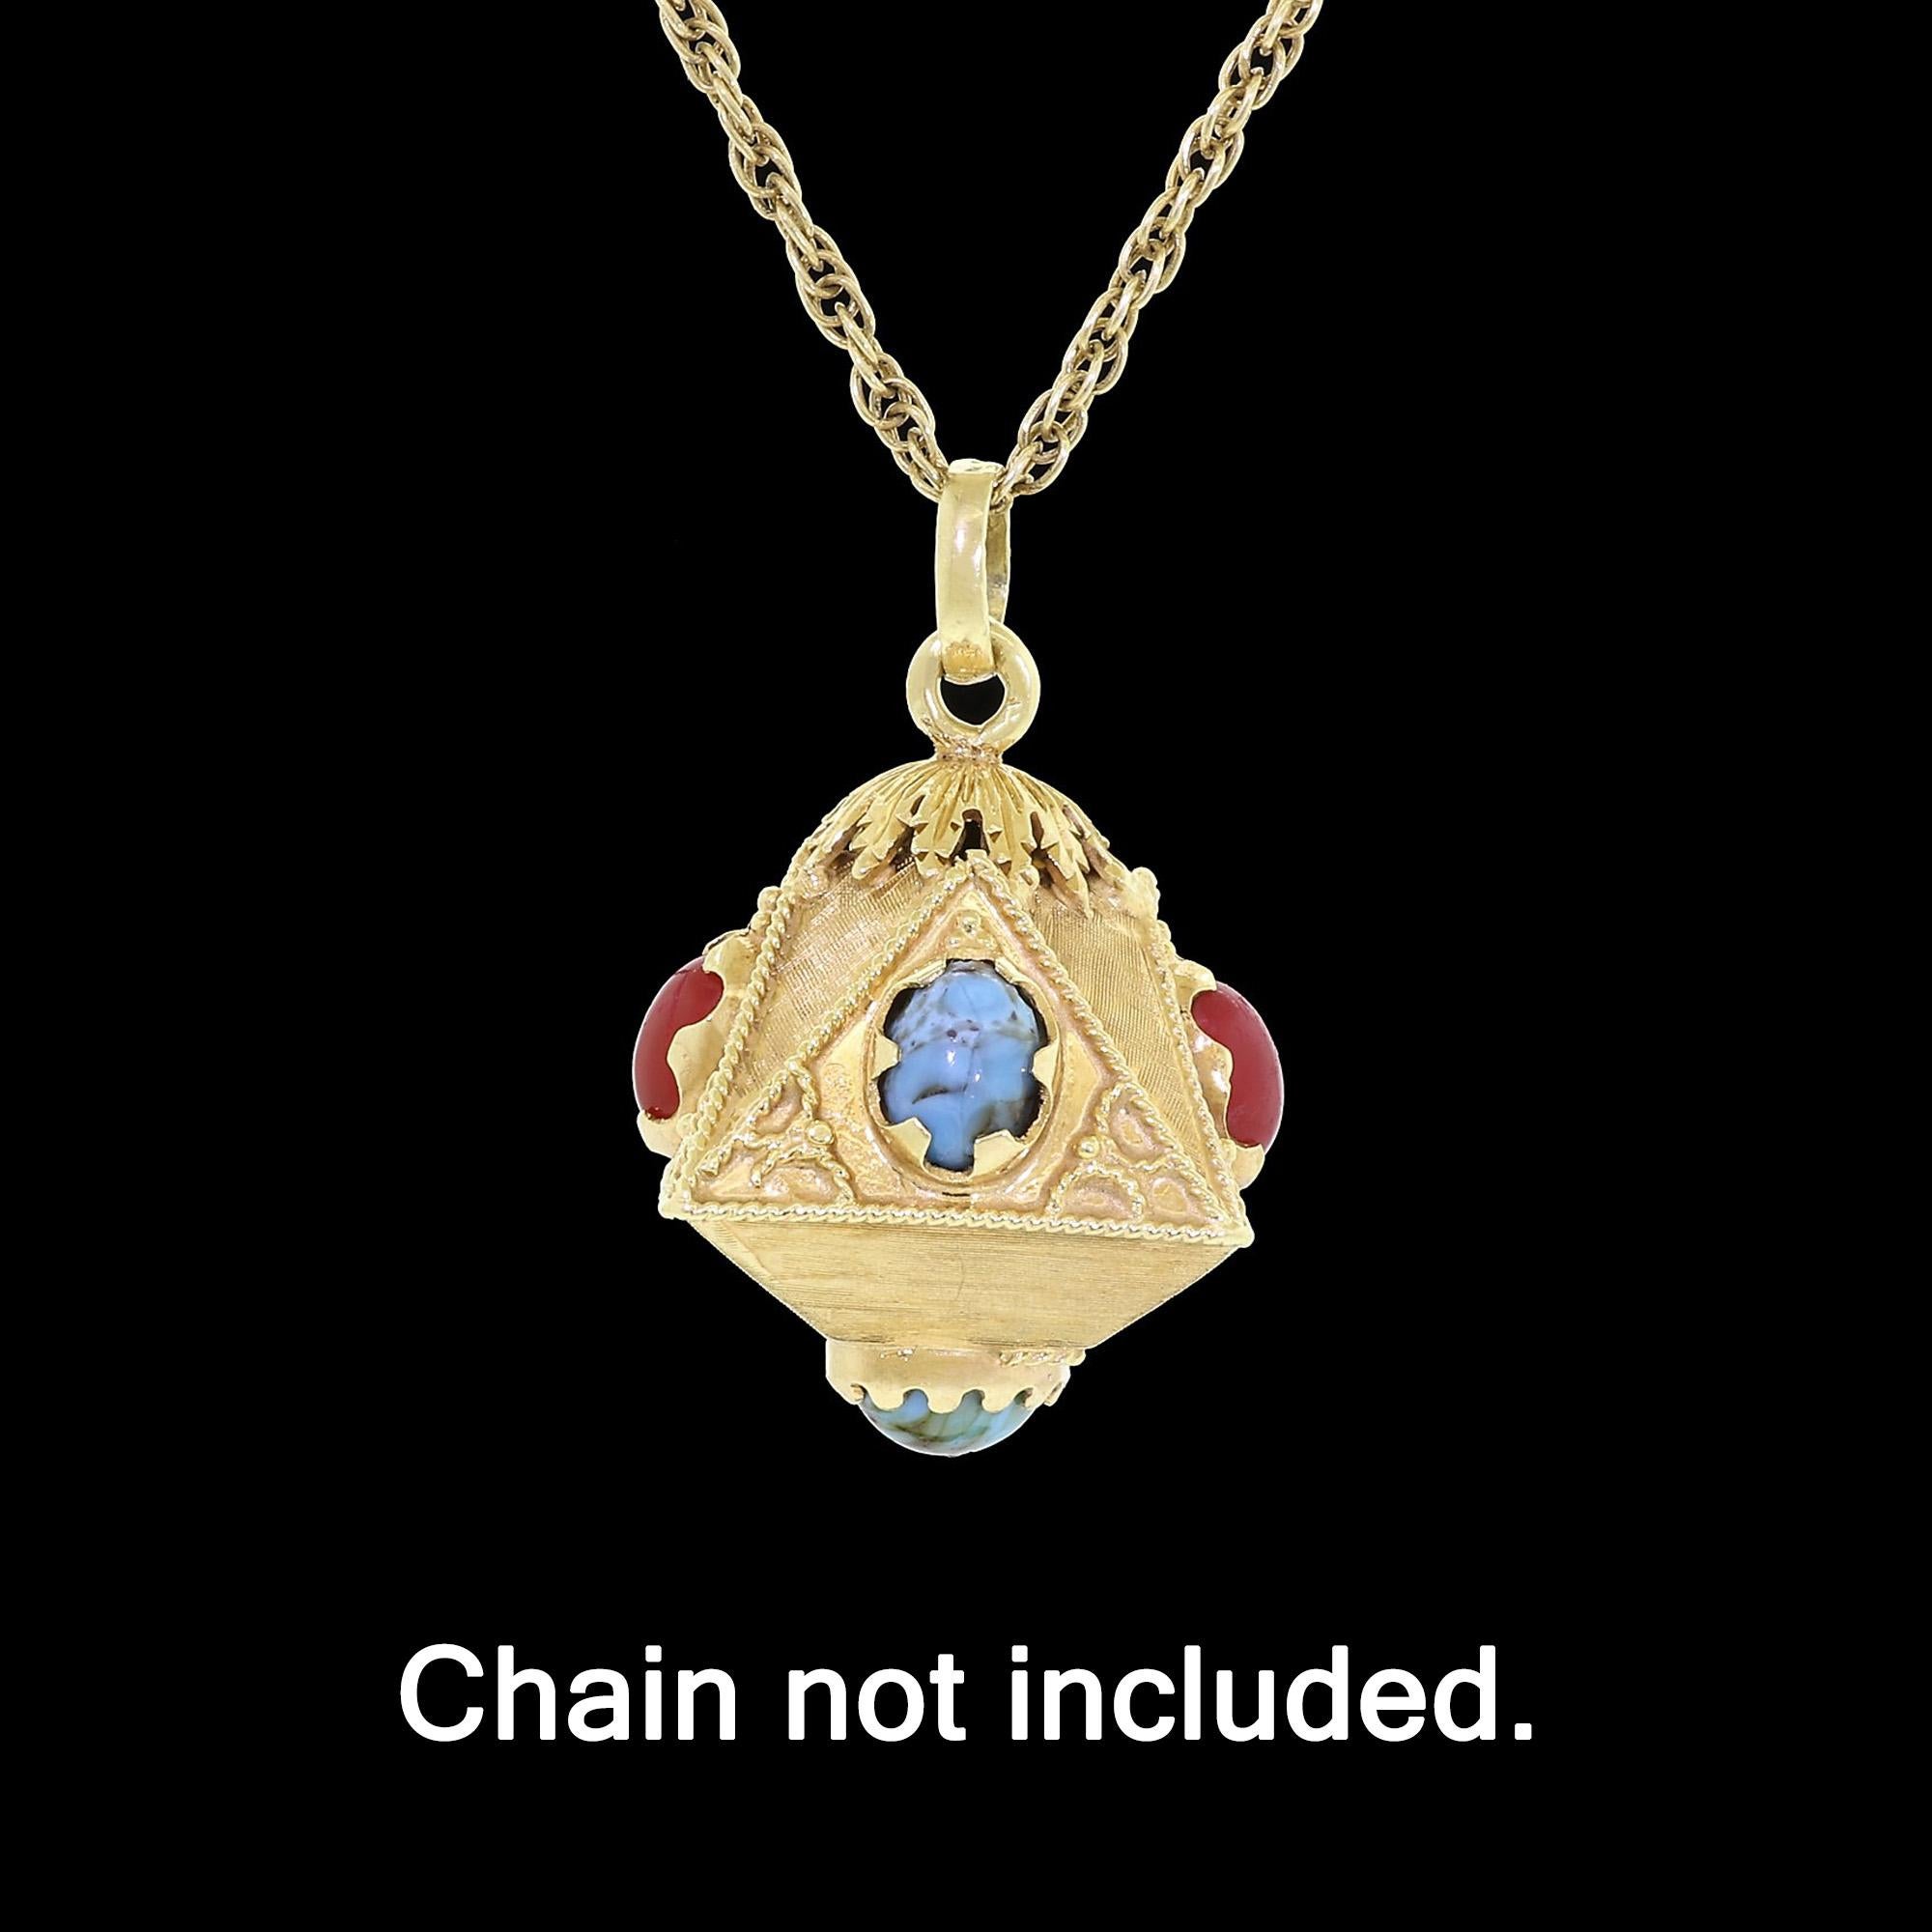 This beautiful Italian 18K yellow gold accent charm merges functional versatility with a remarkable Etruscan-style design. The striking aesthetic is created by coupling intricate gold rope and etch work with red and turquoise colored art glass